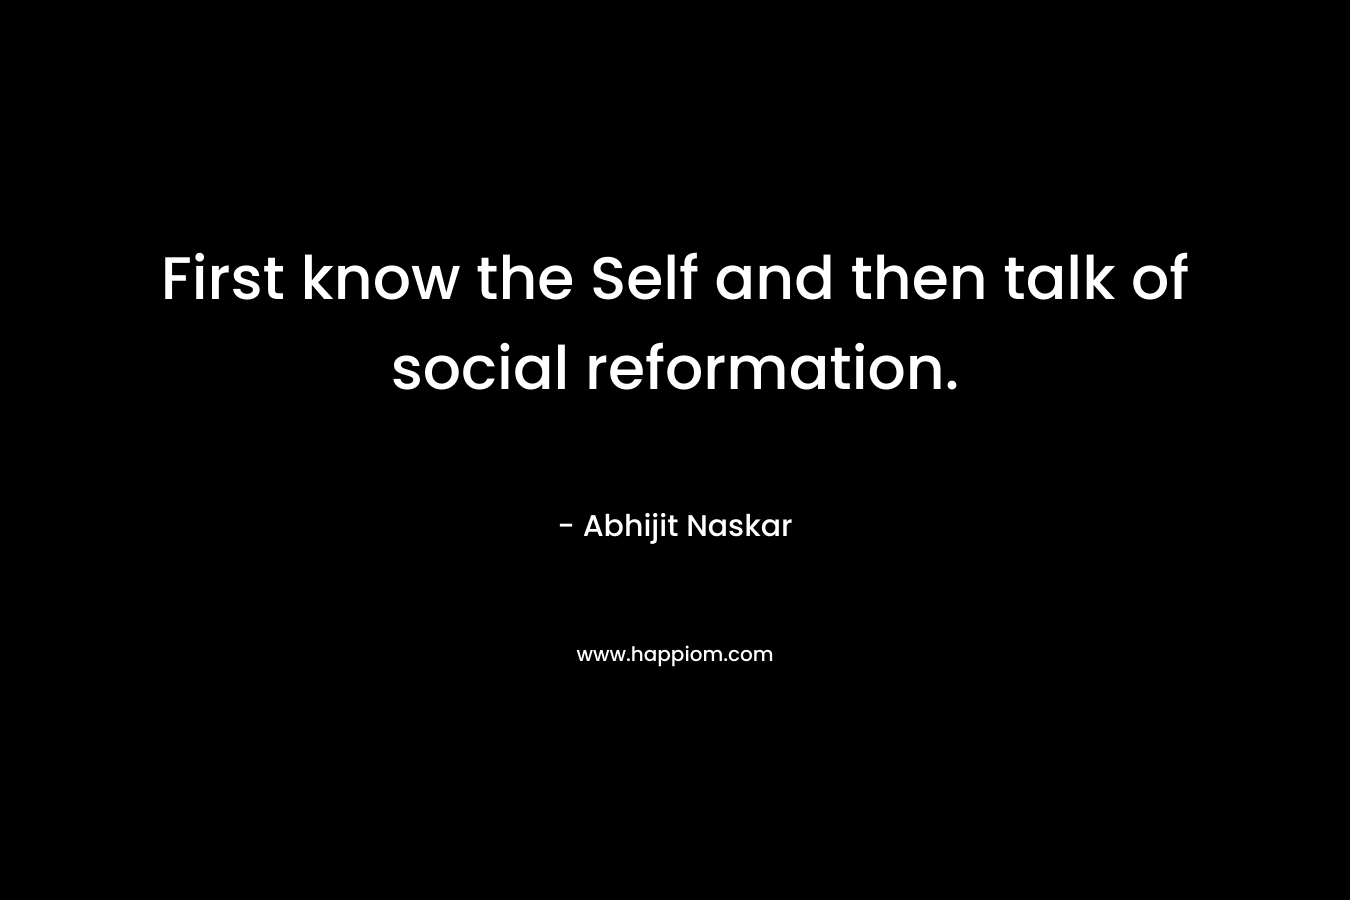 First know the Self and then talk of social reformation.